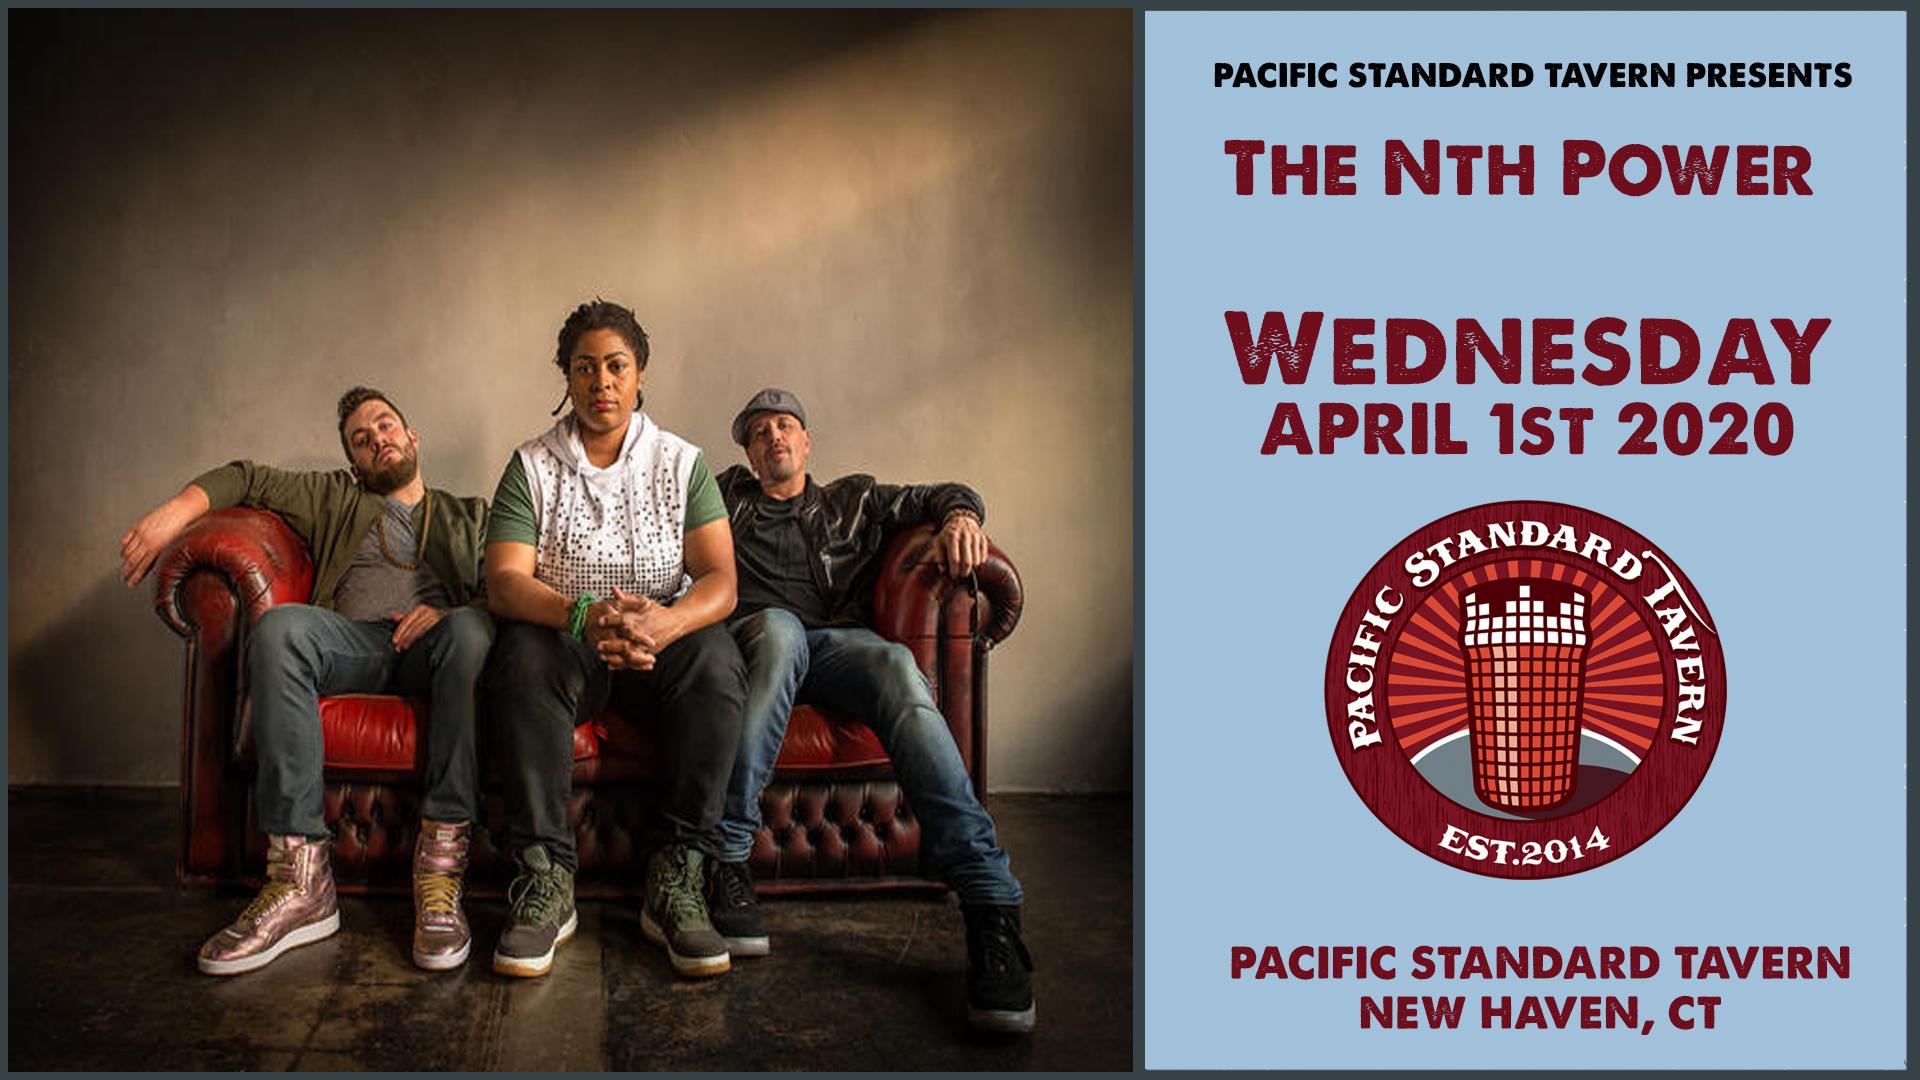 The Nth Power Wednesday April 1st 2020 at Pacific Standard Tavern